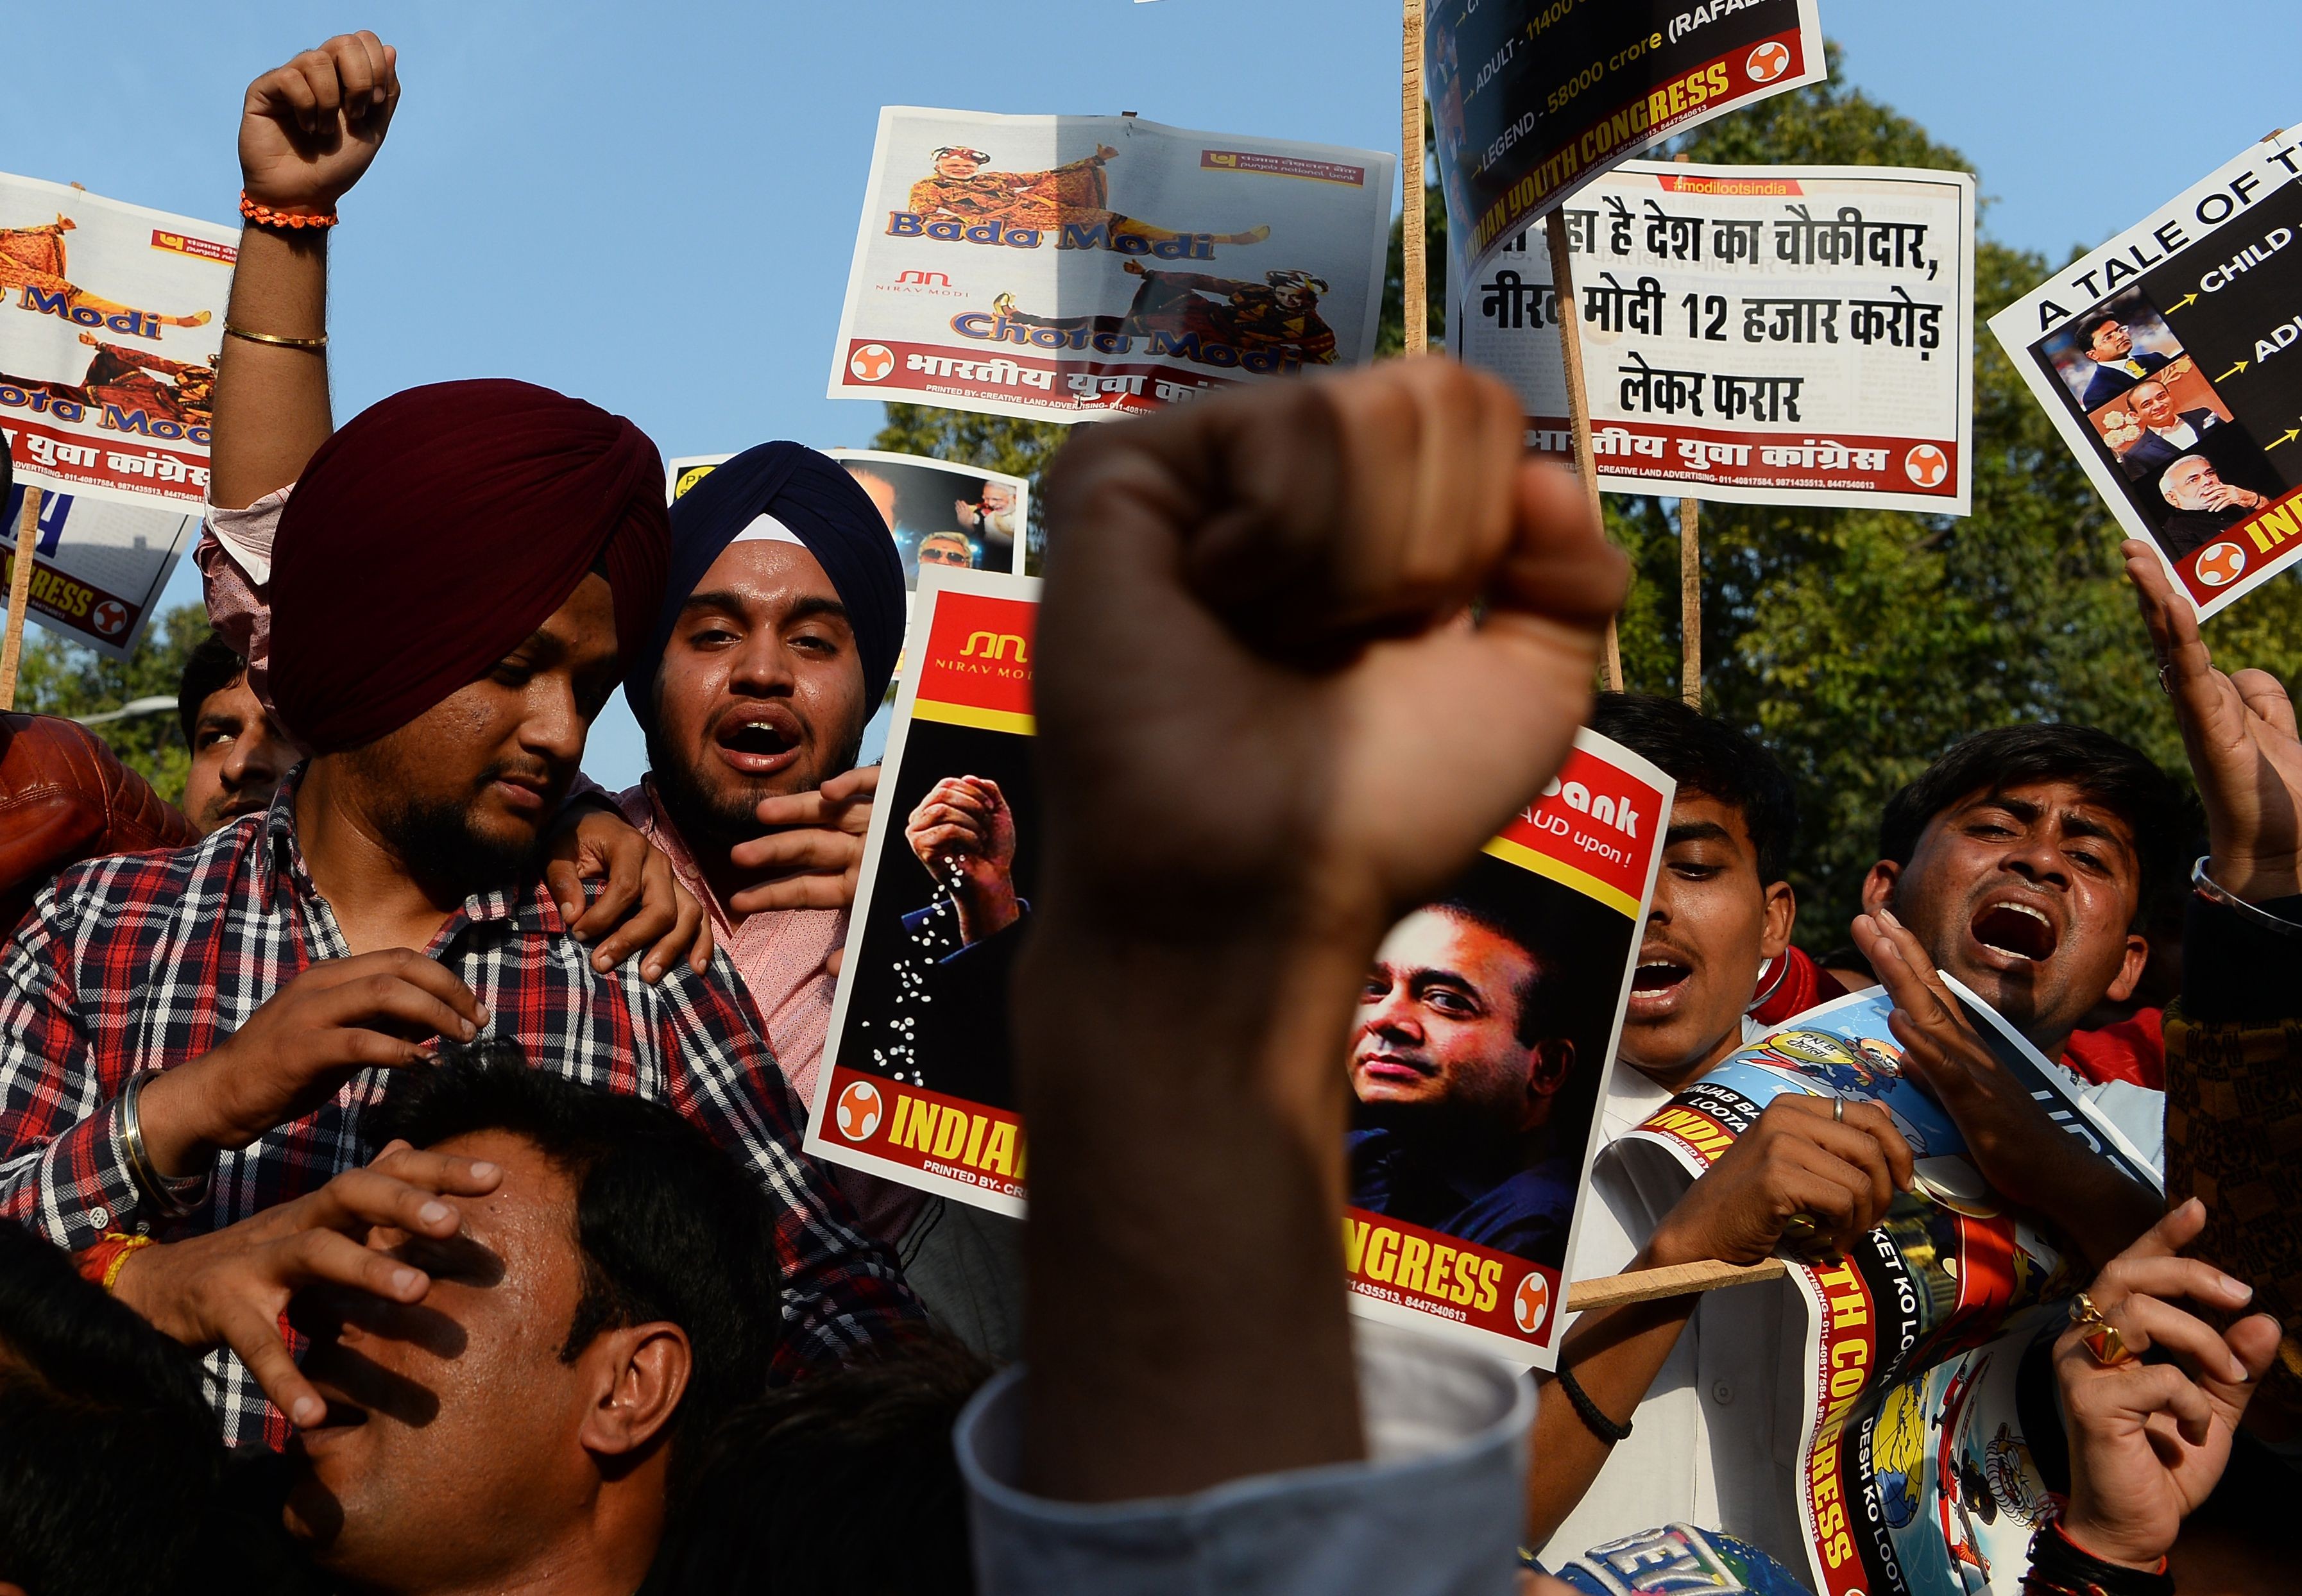 A protest against billionaire jeweller Nirav Modi and India’s Finance Minister Arun Jaitley in the wake of the Punjab National Bank banking fraud scandal in New Delhi. Photo: AFP